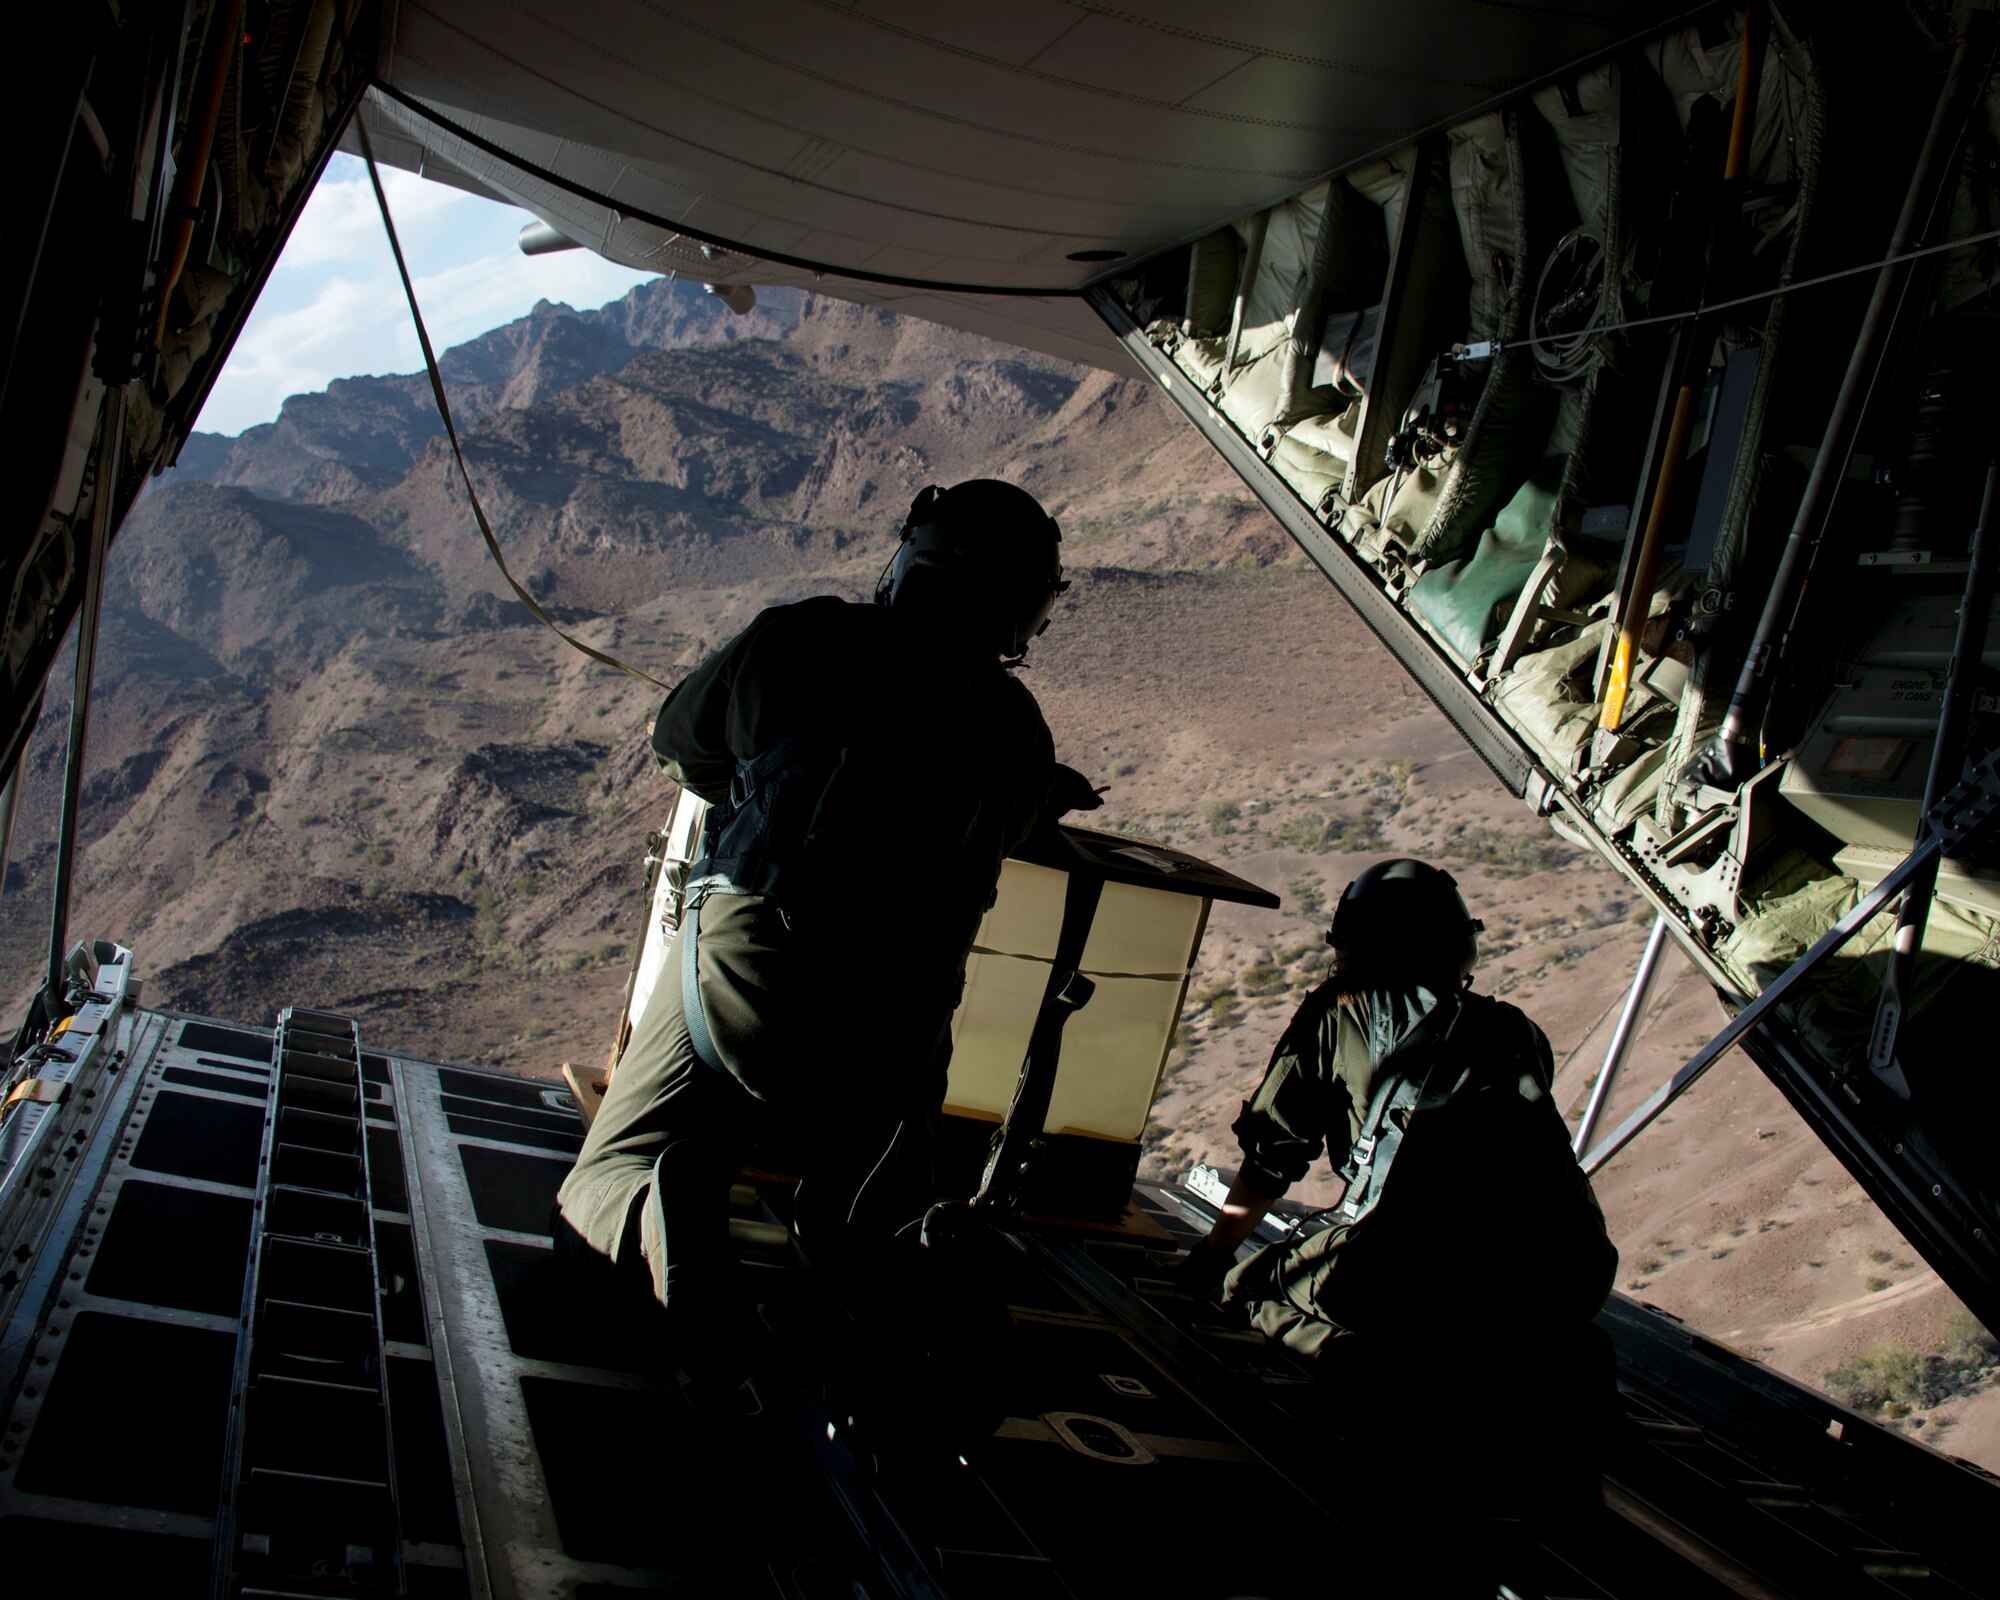 Senior Master Sgt. Mark Norman, left, and Senior Airman Sam Leebens, loadmasters with the 109th Airlift Squadron wait to release a pallet during a low-cost, low-altitude airdrop in Yuma, Ariz., Feb. 24, 2014. Loadmasters oversee the release of the cargo during the airdrop. 
(U.S. Air National Guard photo by Tech. Sgt. Amy M. Lovgren/ Released)